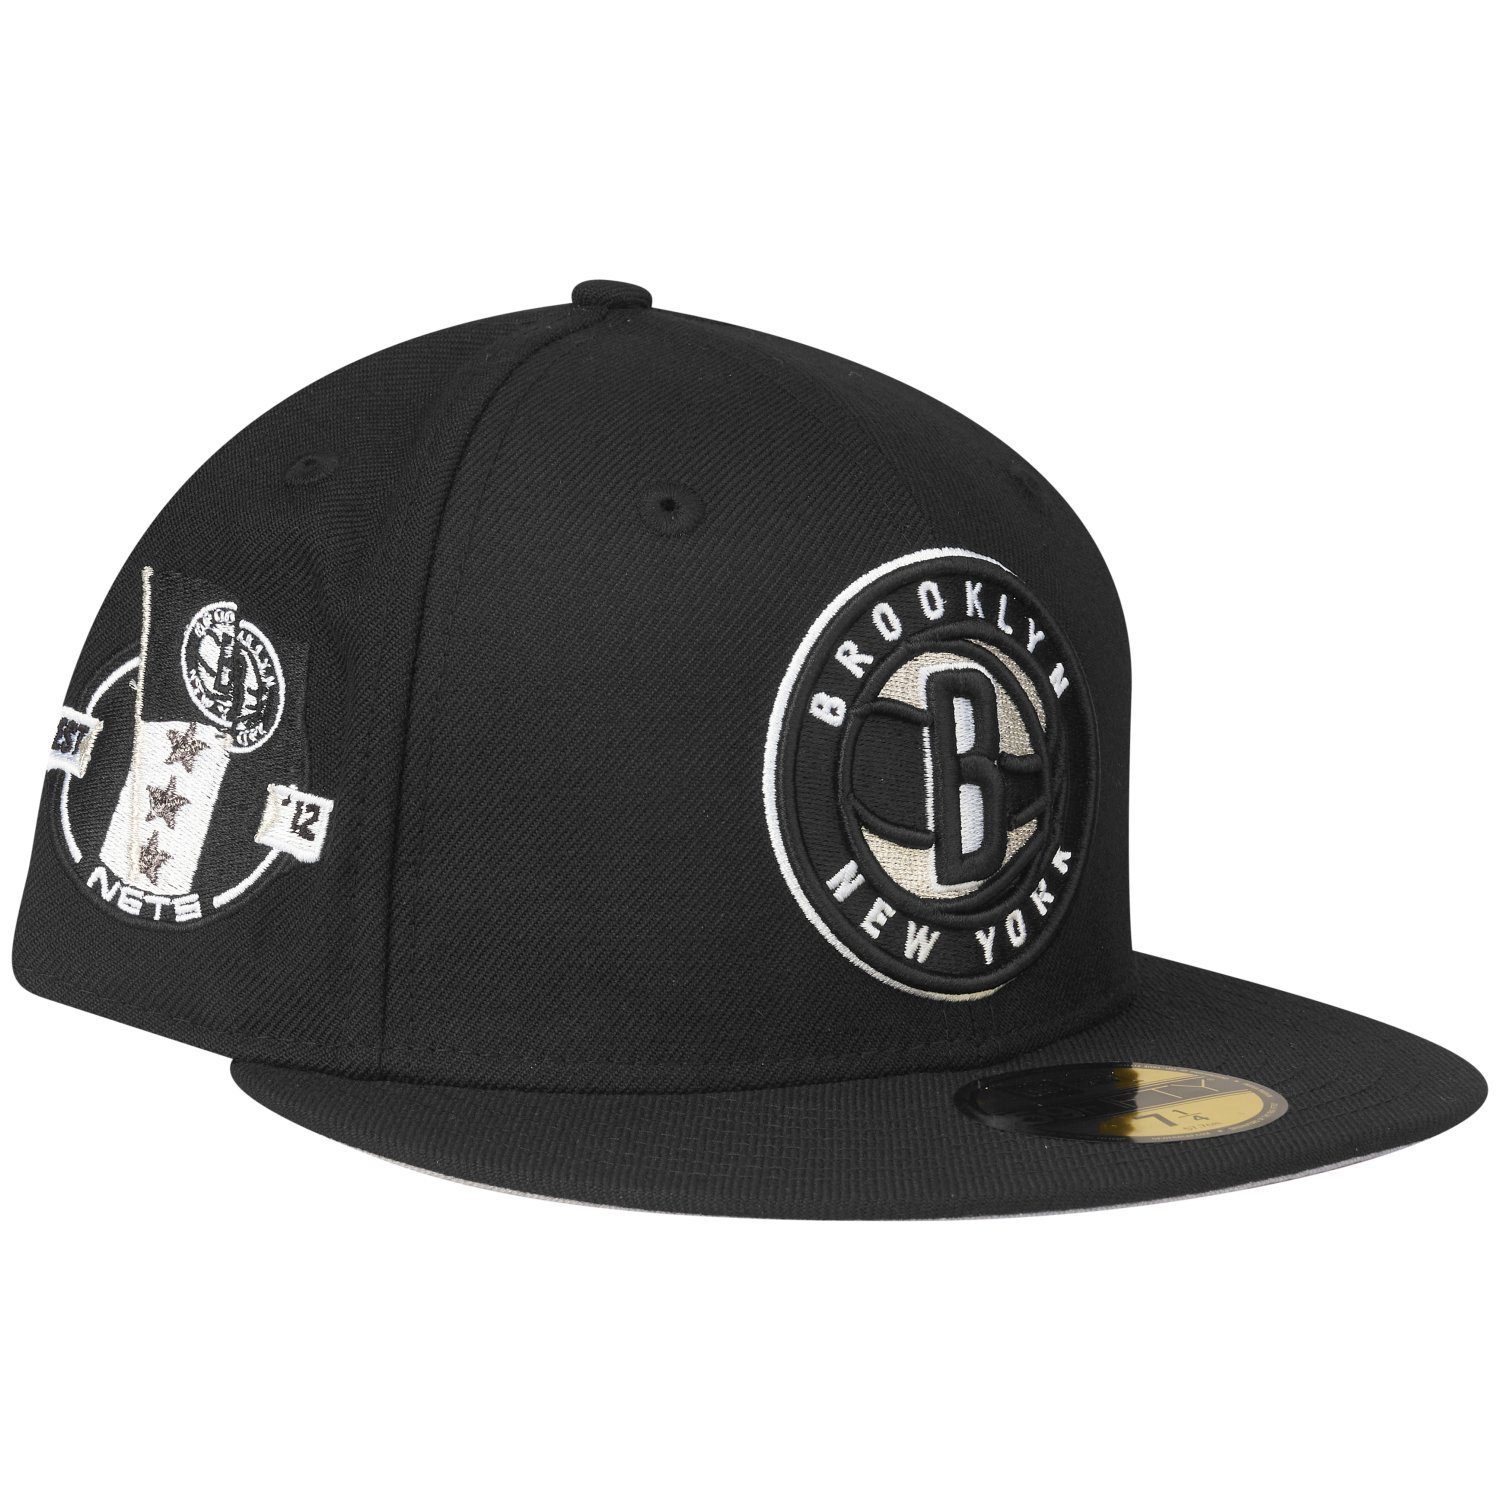 New Era Fitted Cap 59Fifty NBA Brooklyn Nets | Fitted Caps